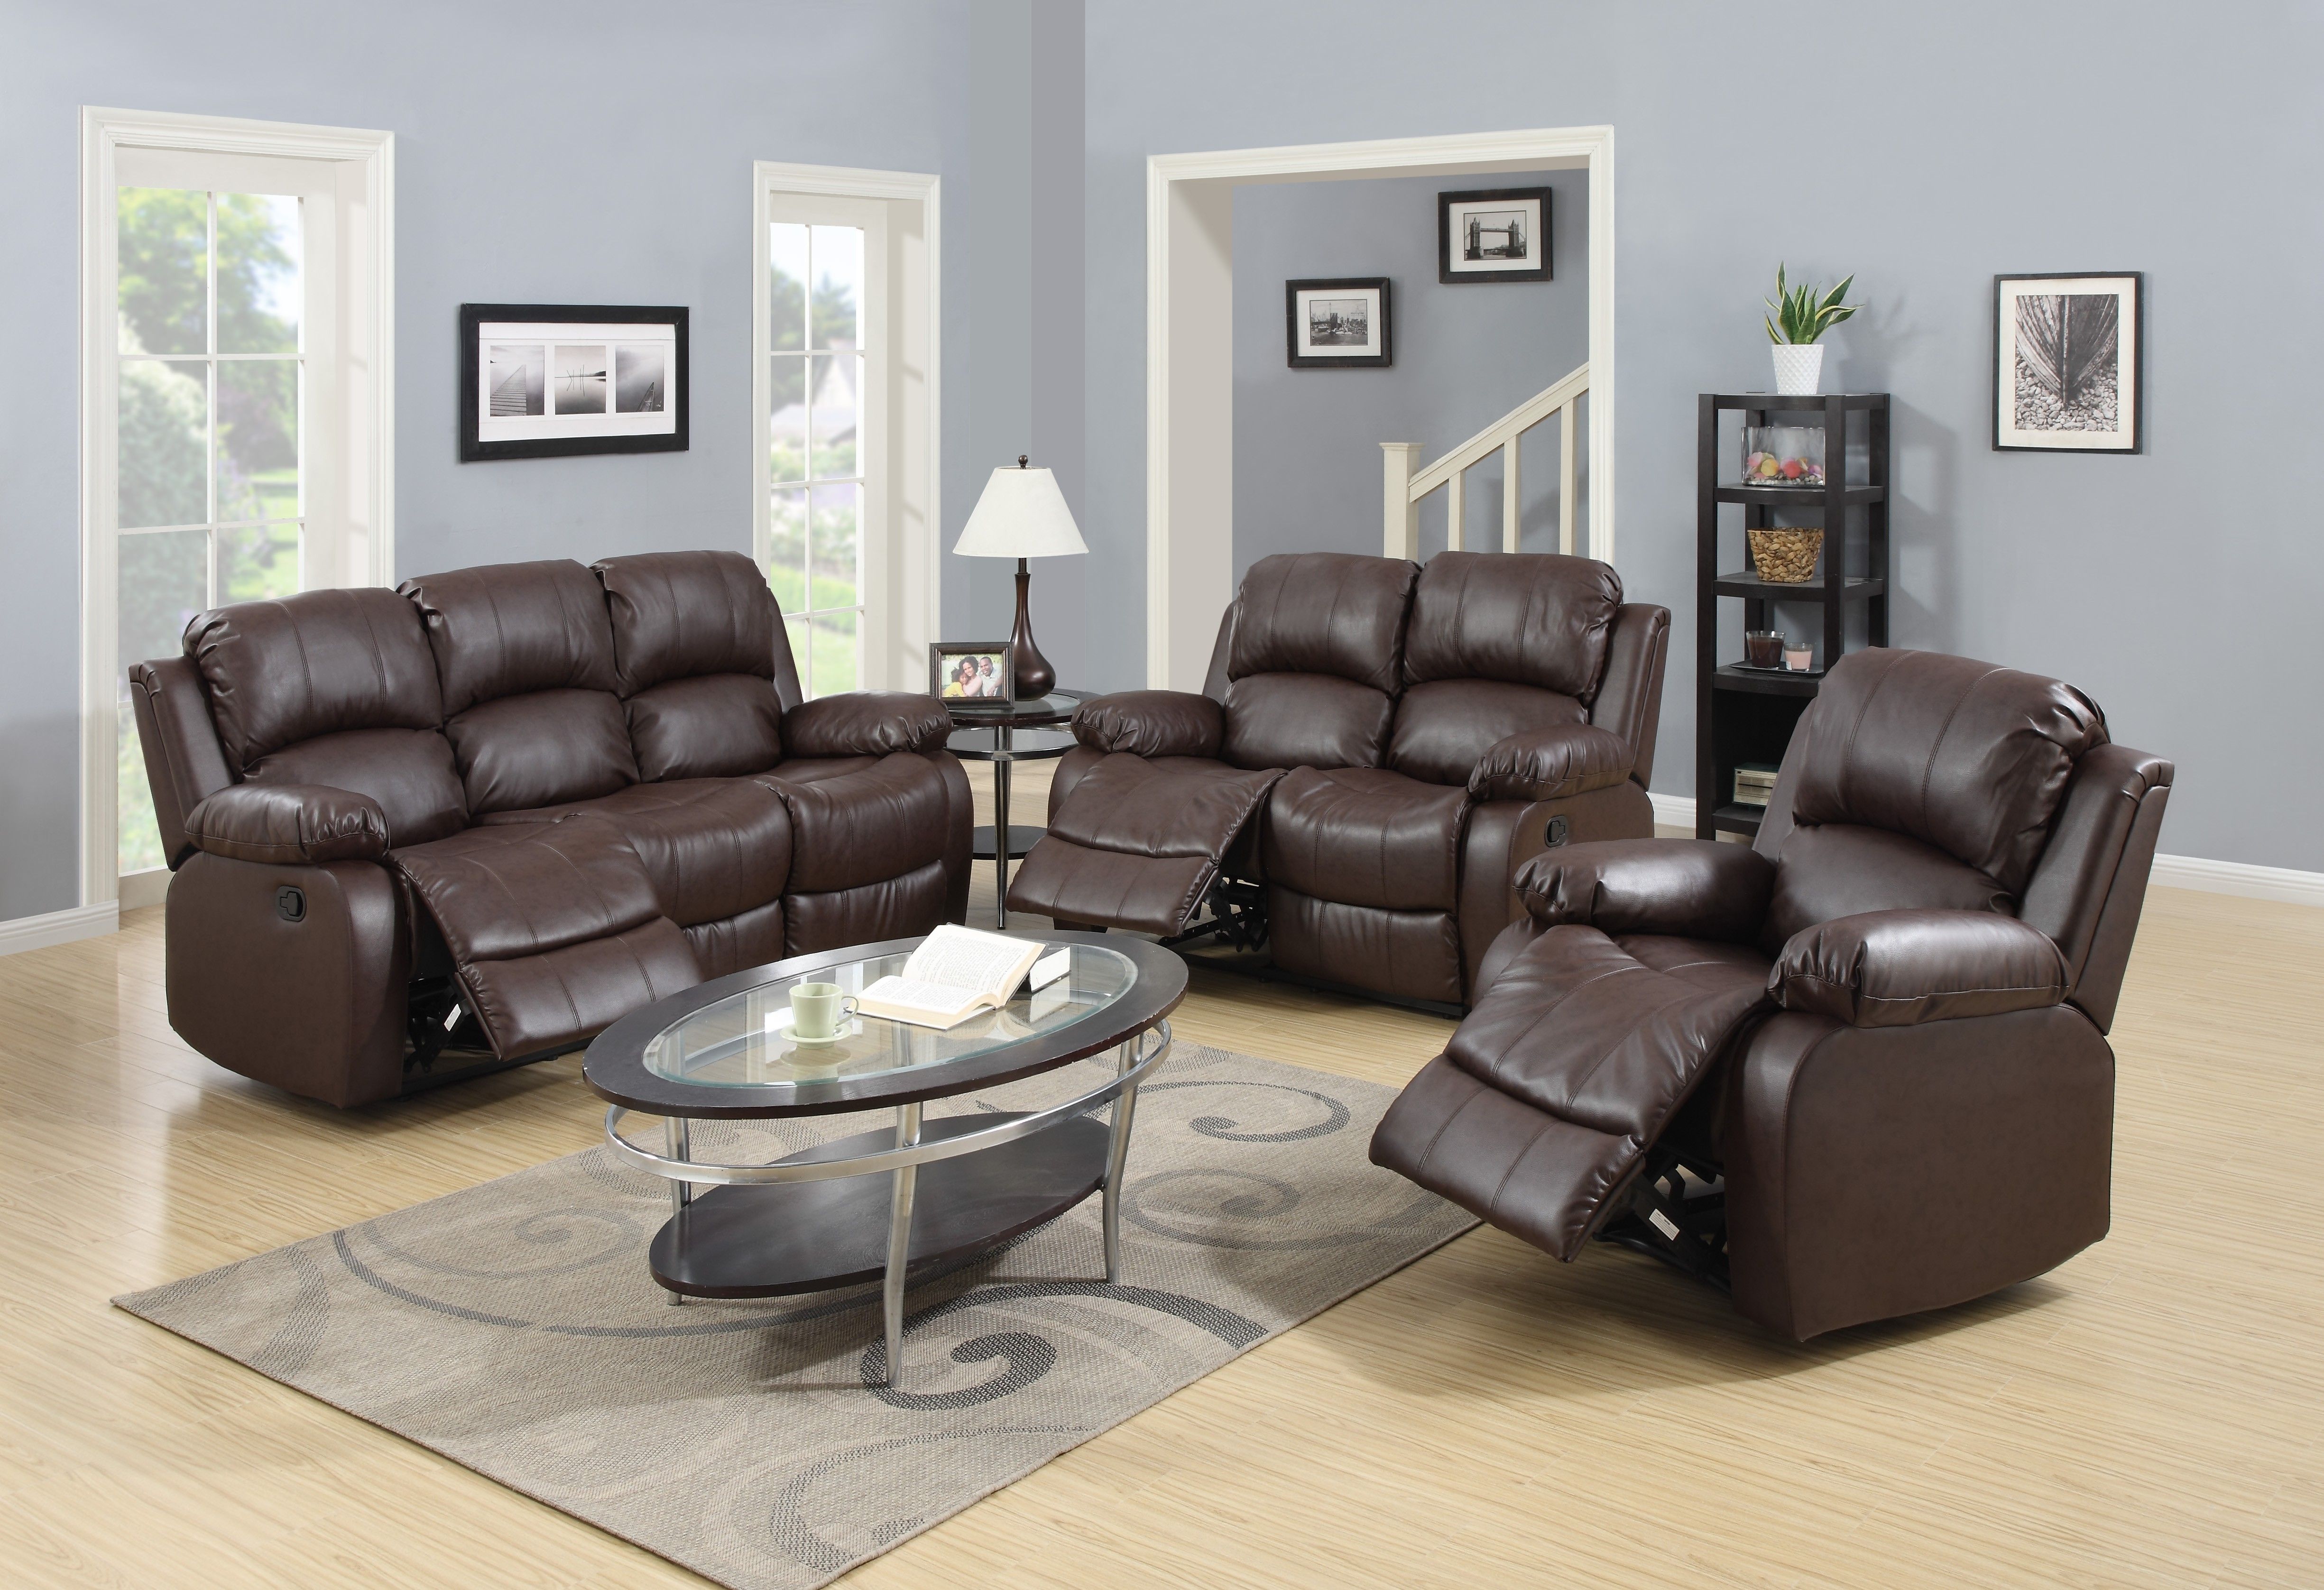 New Sears Sectional Sofa (31 Photos) | Clubanfi Within Sears Sectional Sofas (View 6 of 10)